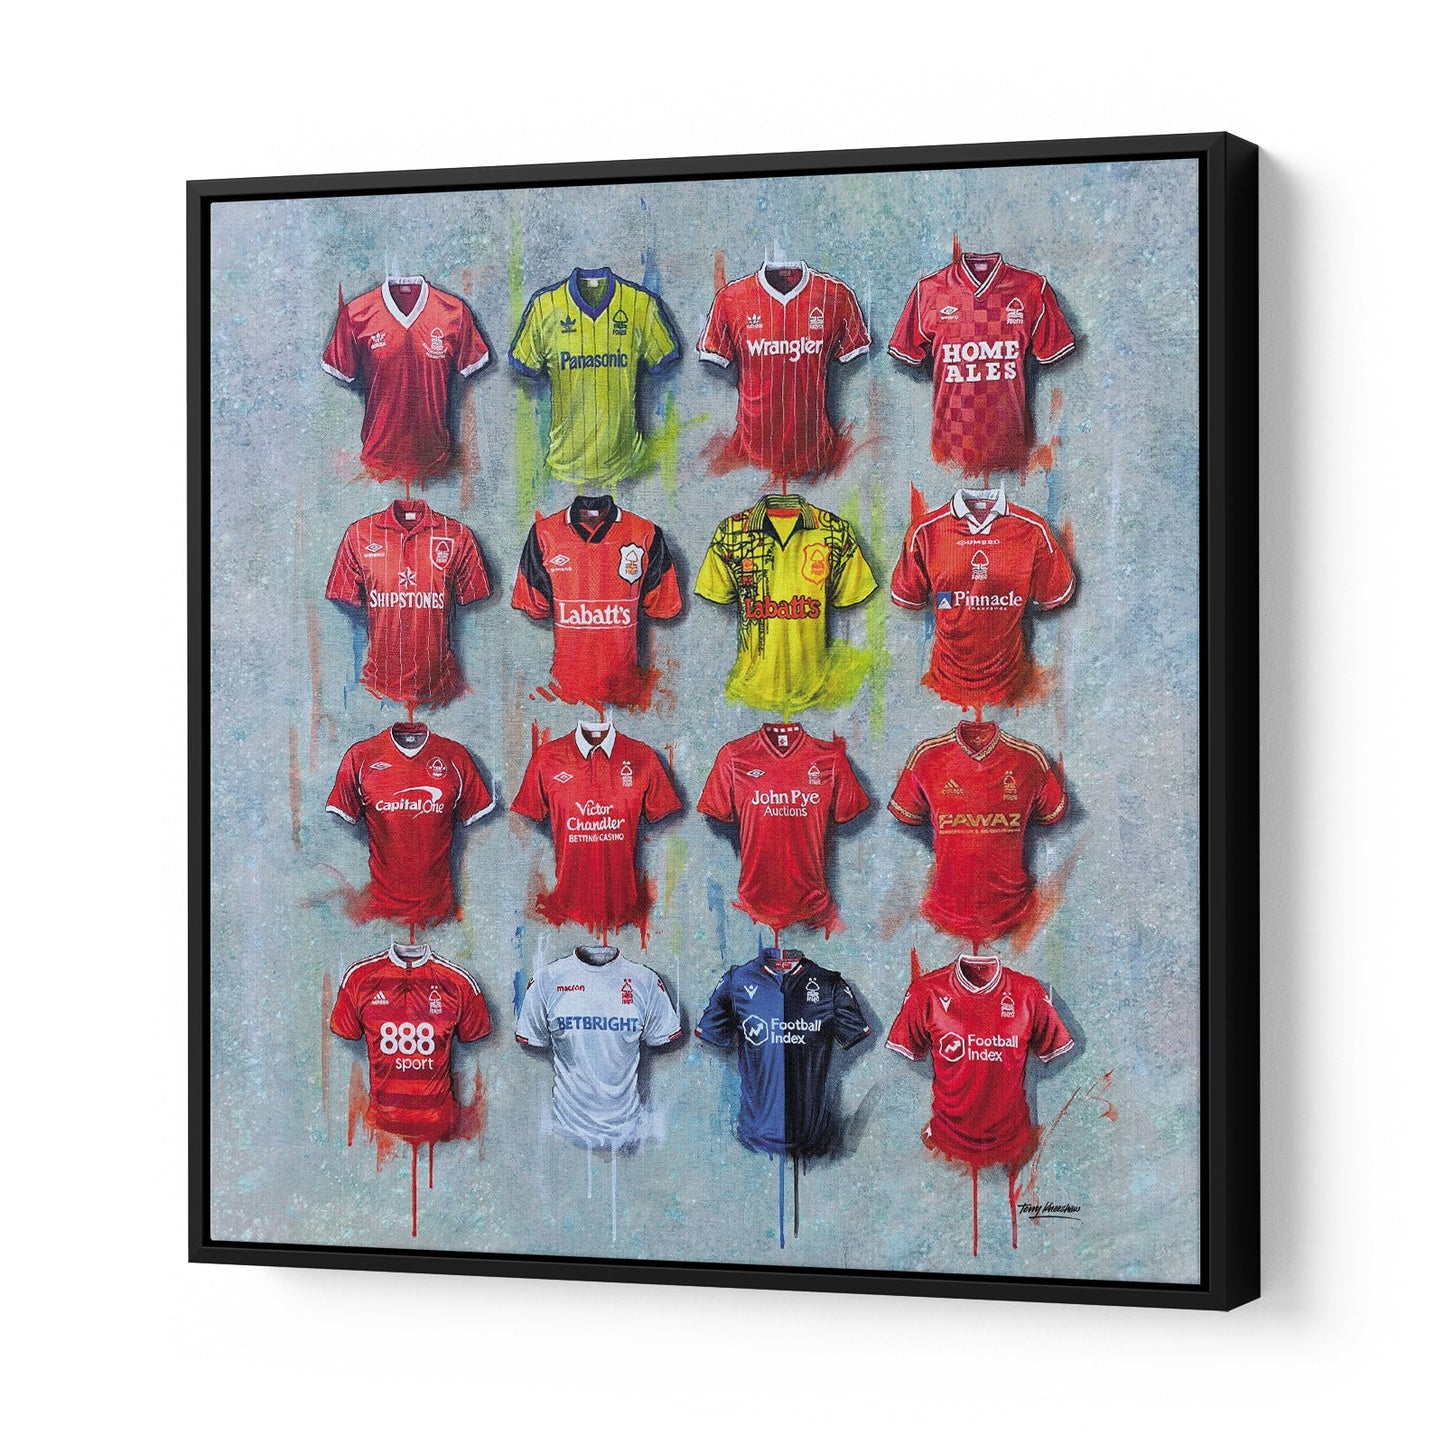 These Nottingham Forest canvases from Terry Kneeshaw are available in various sizes (20x20, 30x30 or 40x40) and framed or unframed in a black floating frame. The artwork features stunning images of the team and its players, perfect for any fan or collector. Add a touch of the Reds to your home or office decor with these high-quality canvases.